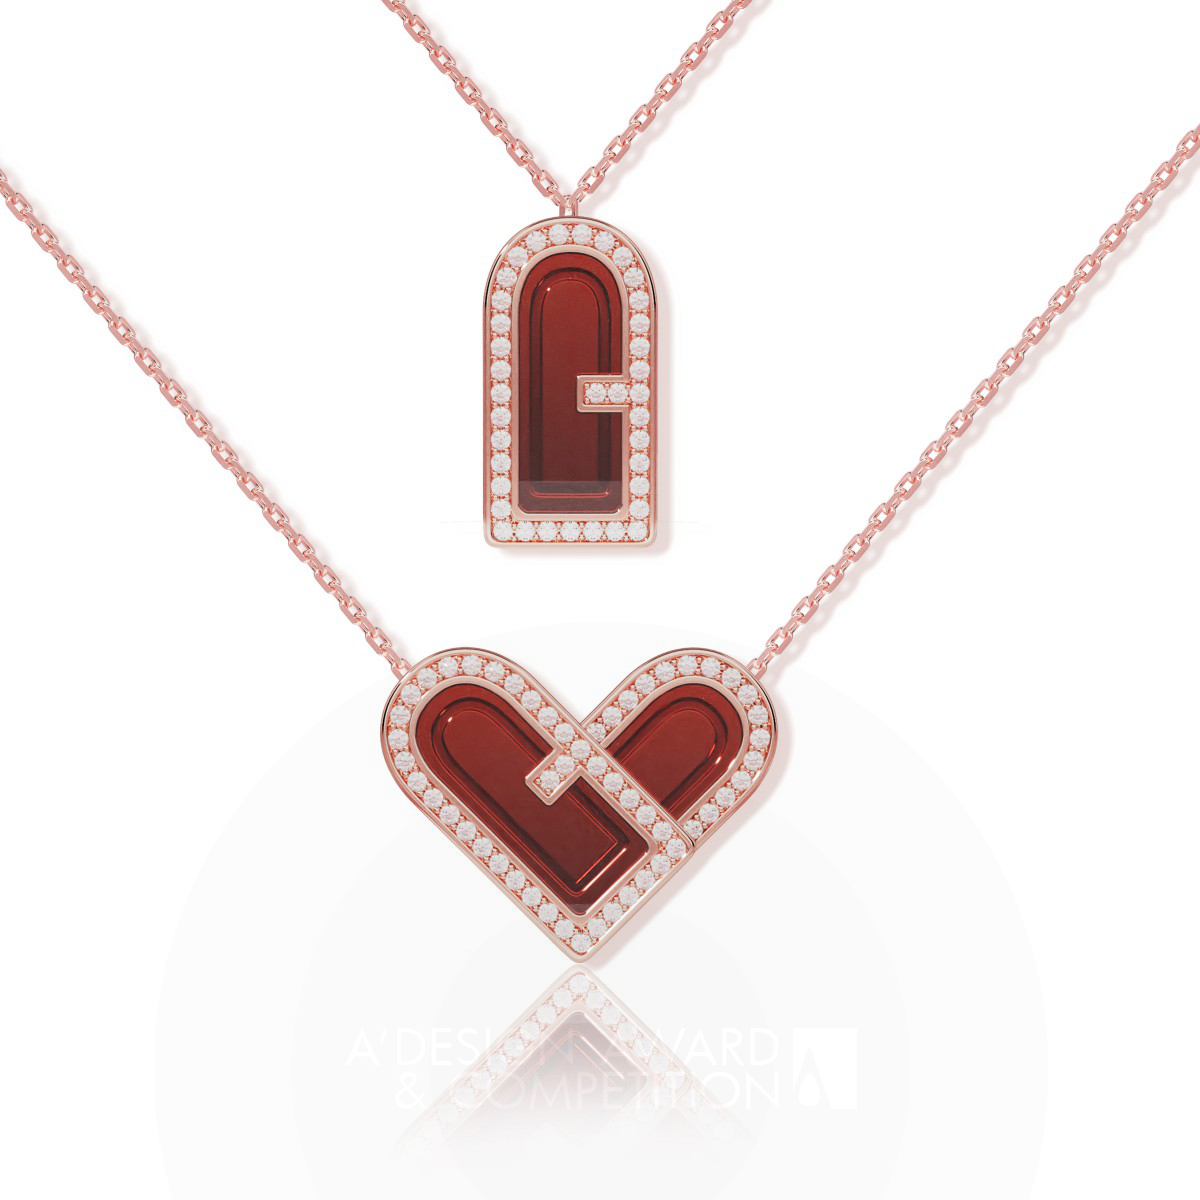 The Door of One’s Heart: A Unique Necklace Design by Siting Ye